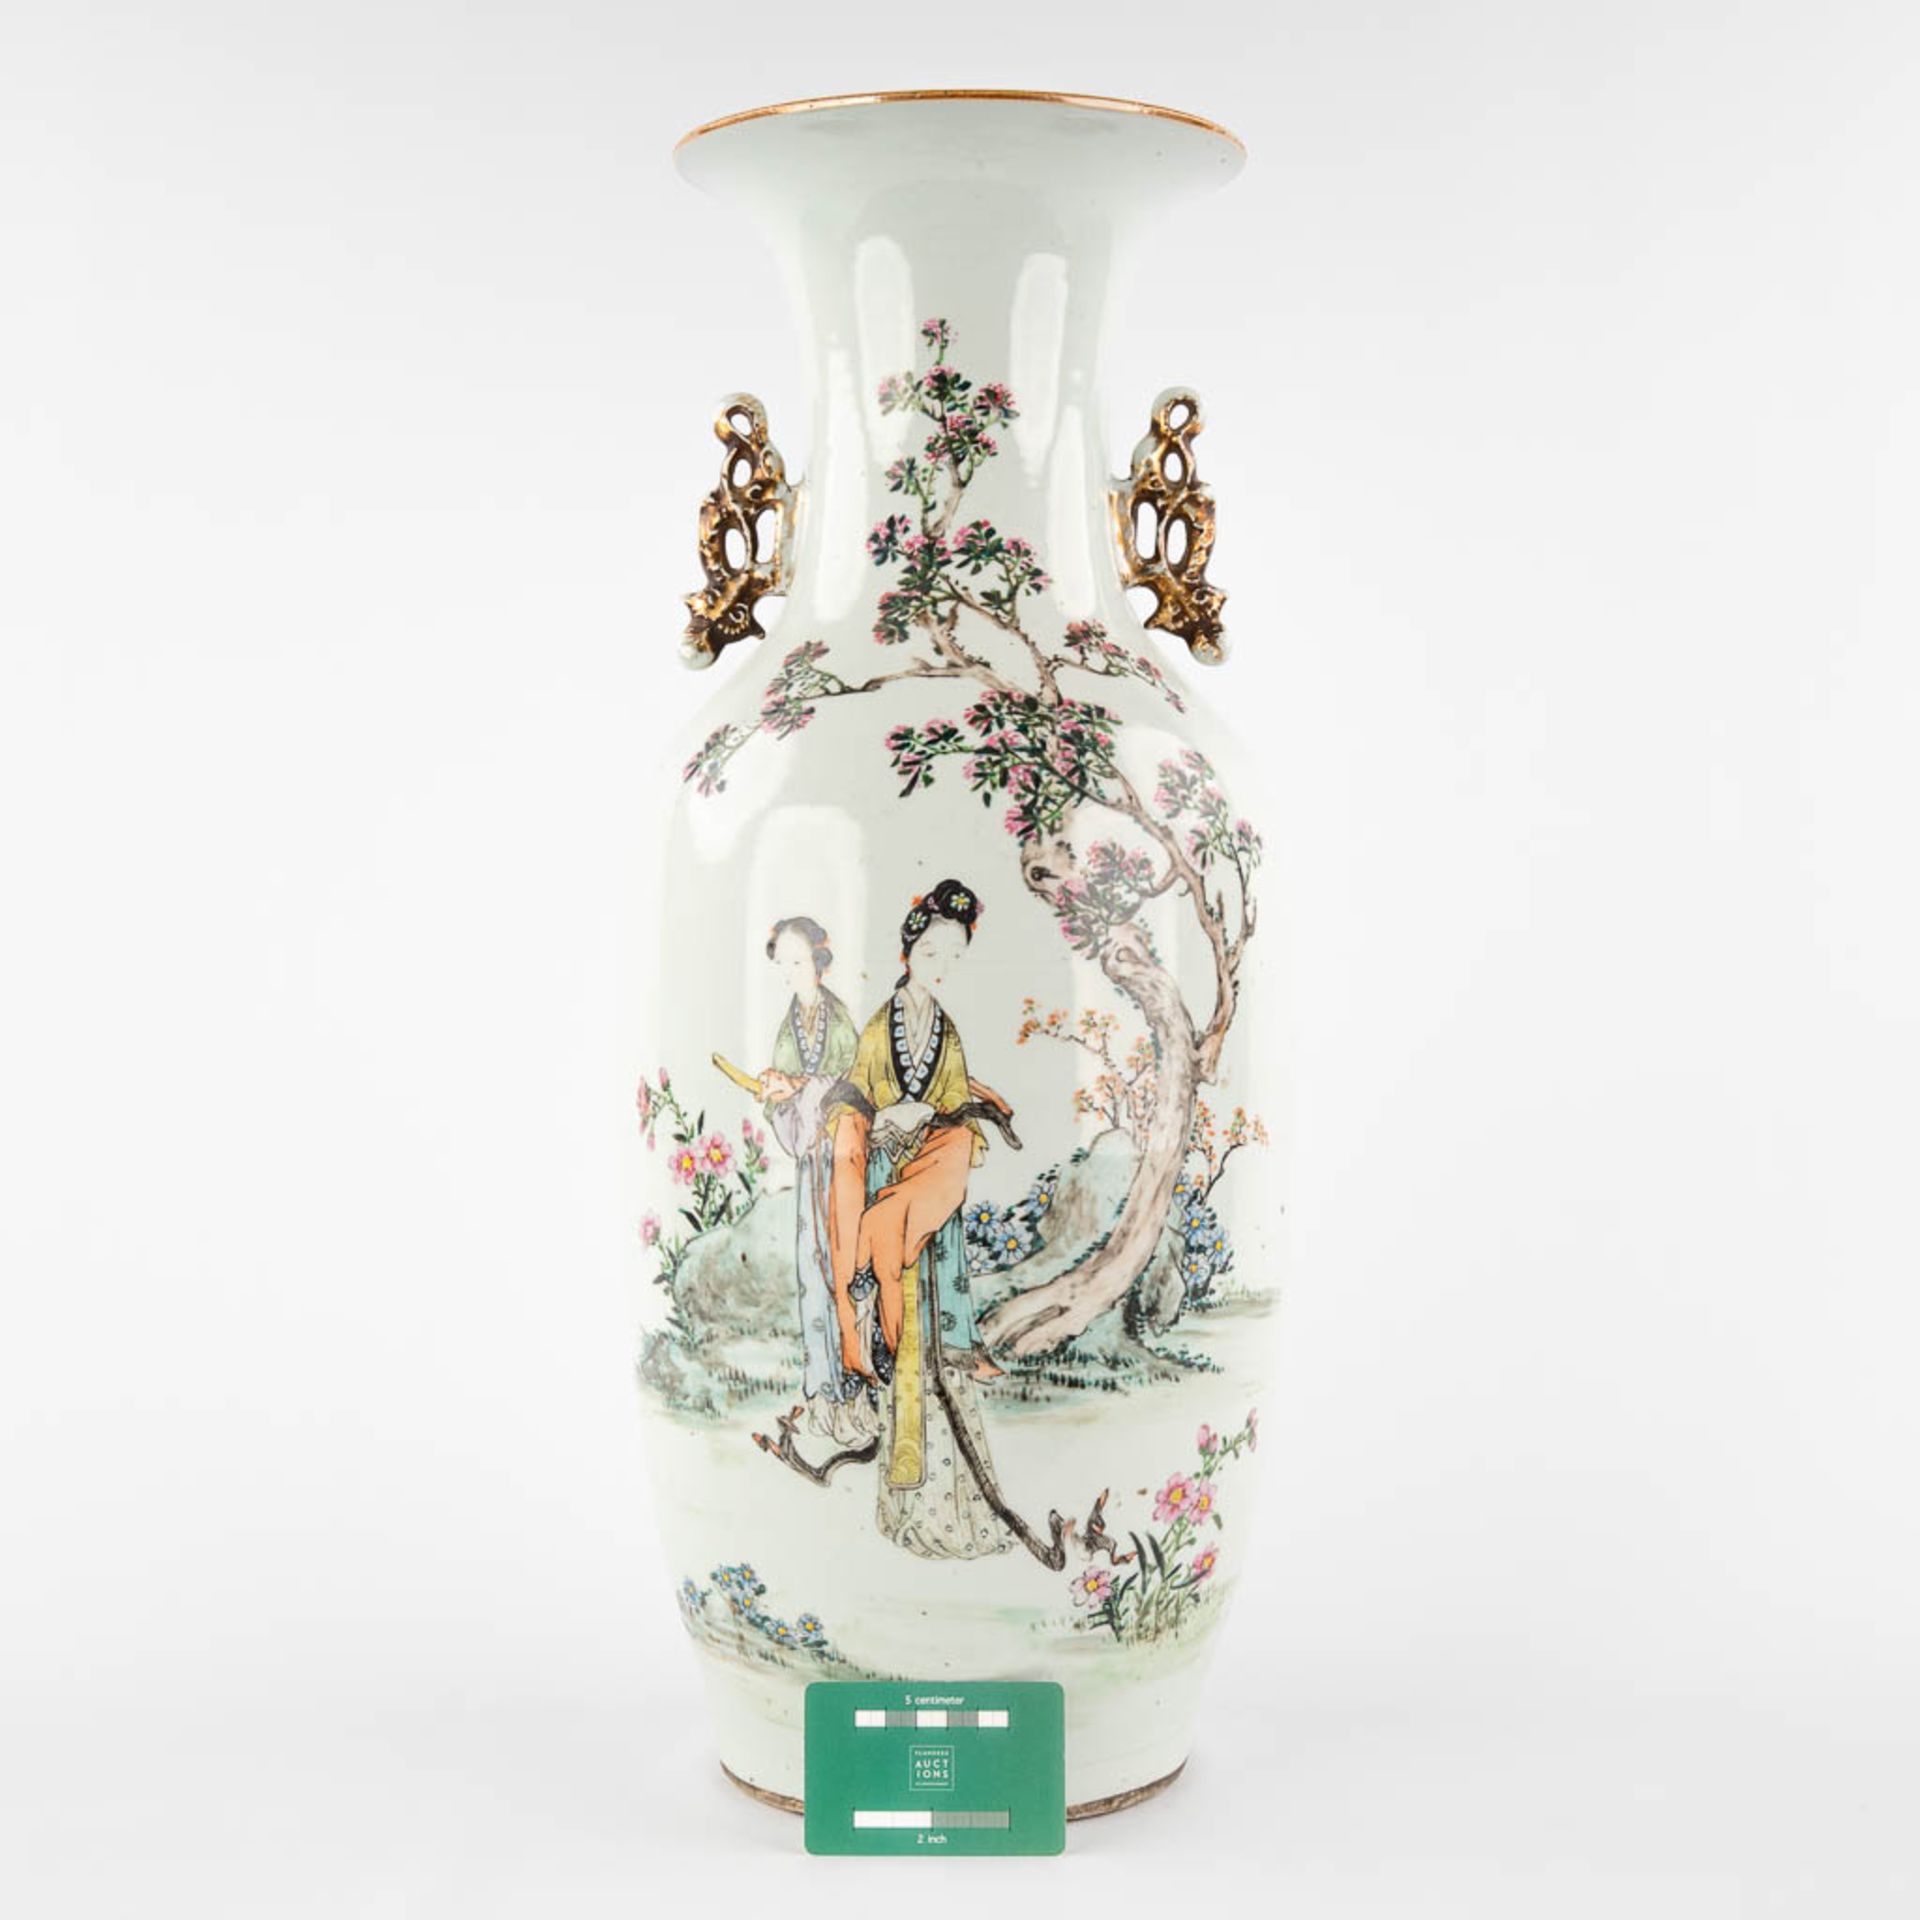 A Chinese vase decorated with ladies and calligraphic texts. 19th/20th C. (H:58 x D:22 cm) - Image 2 of 12